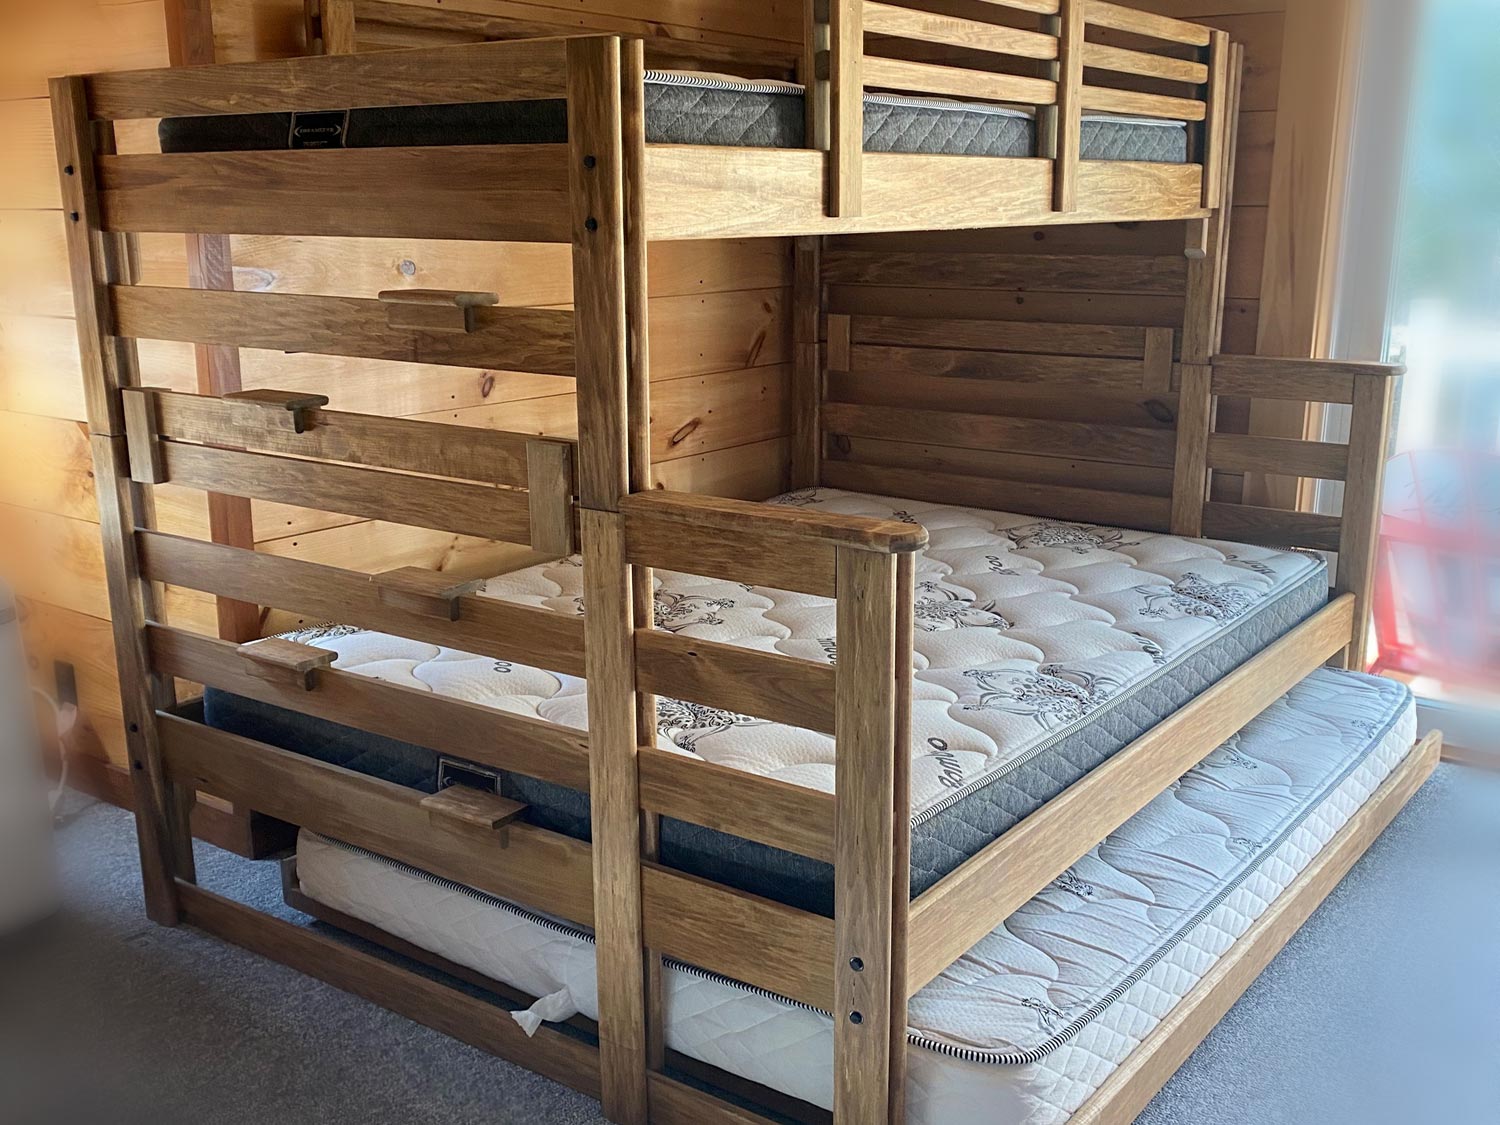 bunk bed converts to double